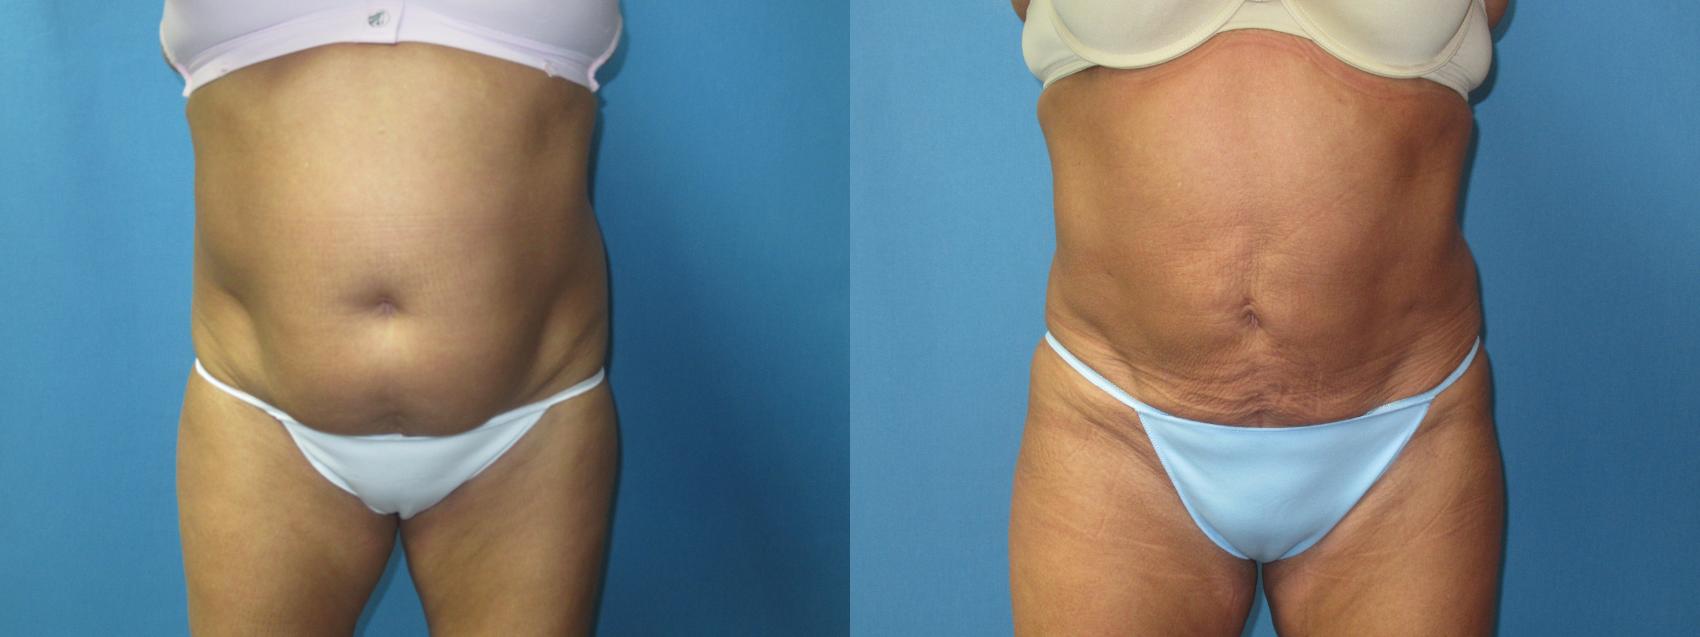 Before & After Liposuction - Abdomen / Flanks Case 180 Front View in Coeur d'Alene, ID